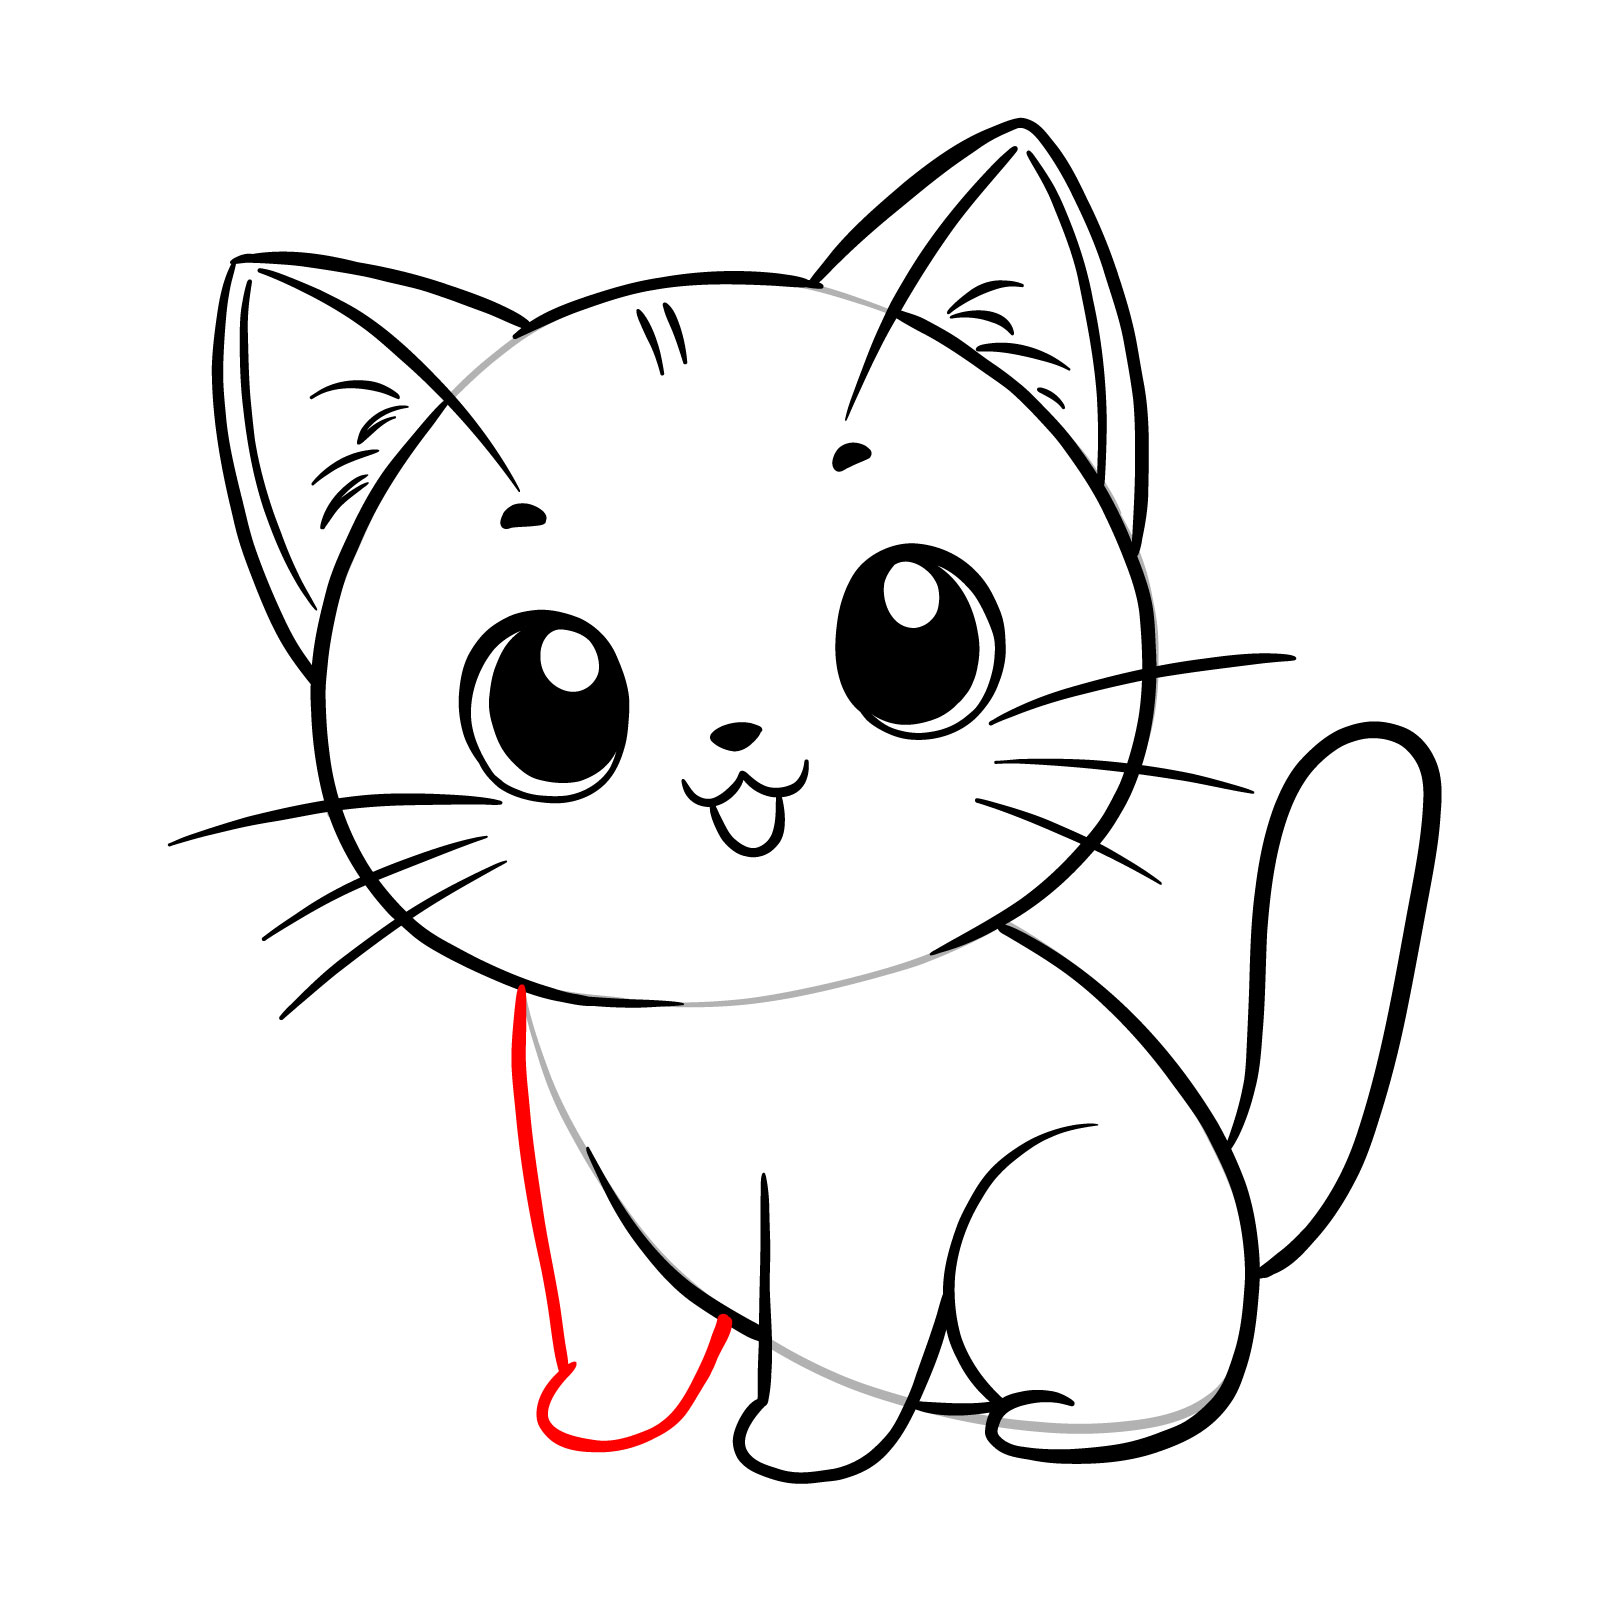 How to draw an anime cat - step 10